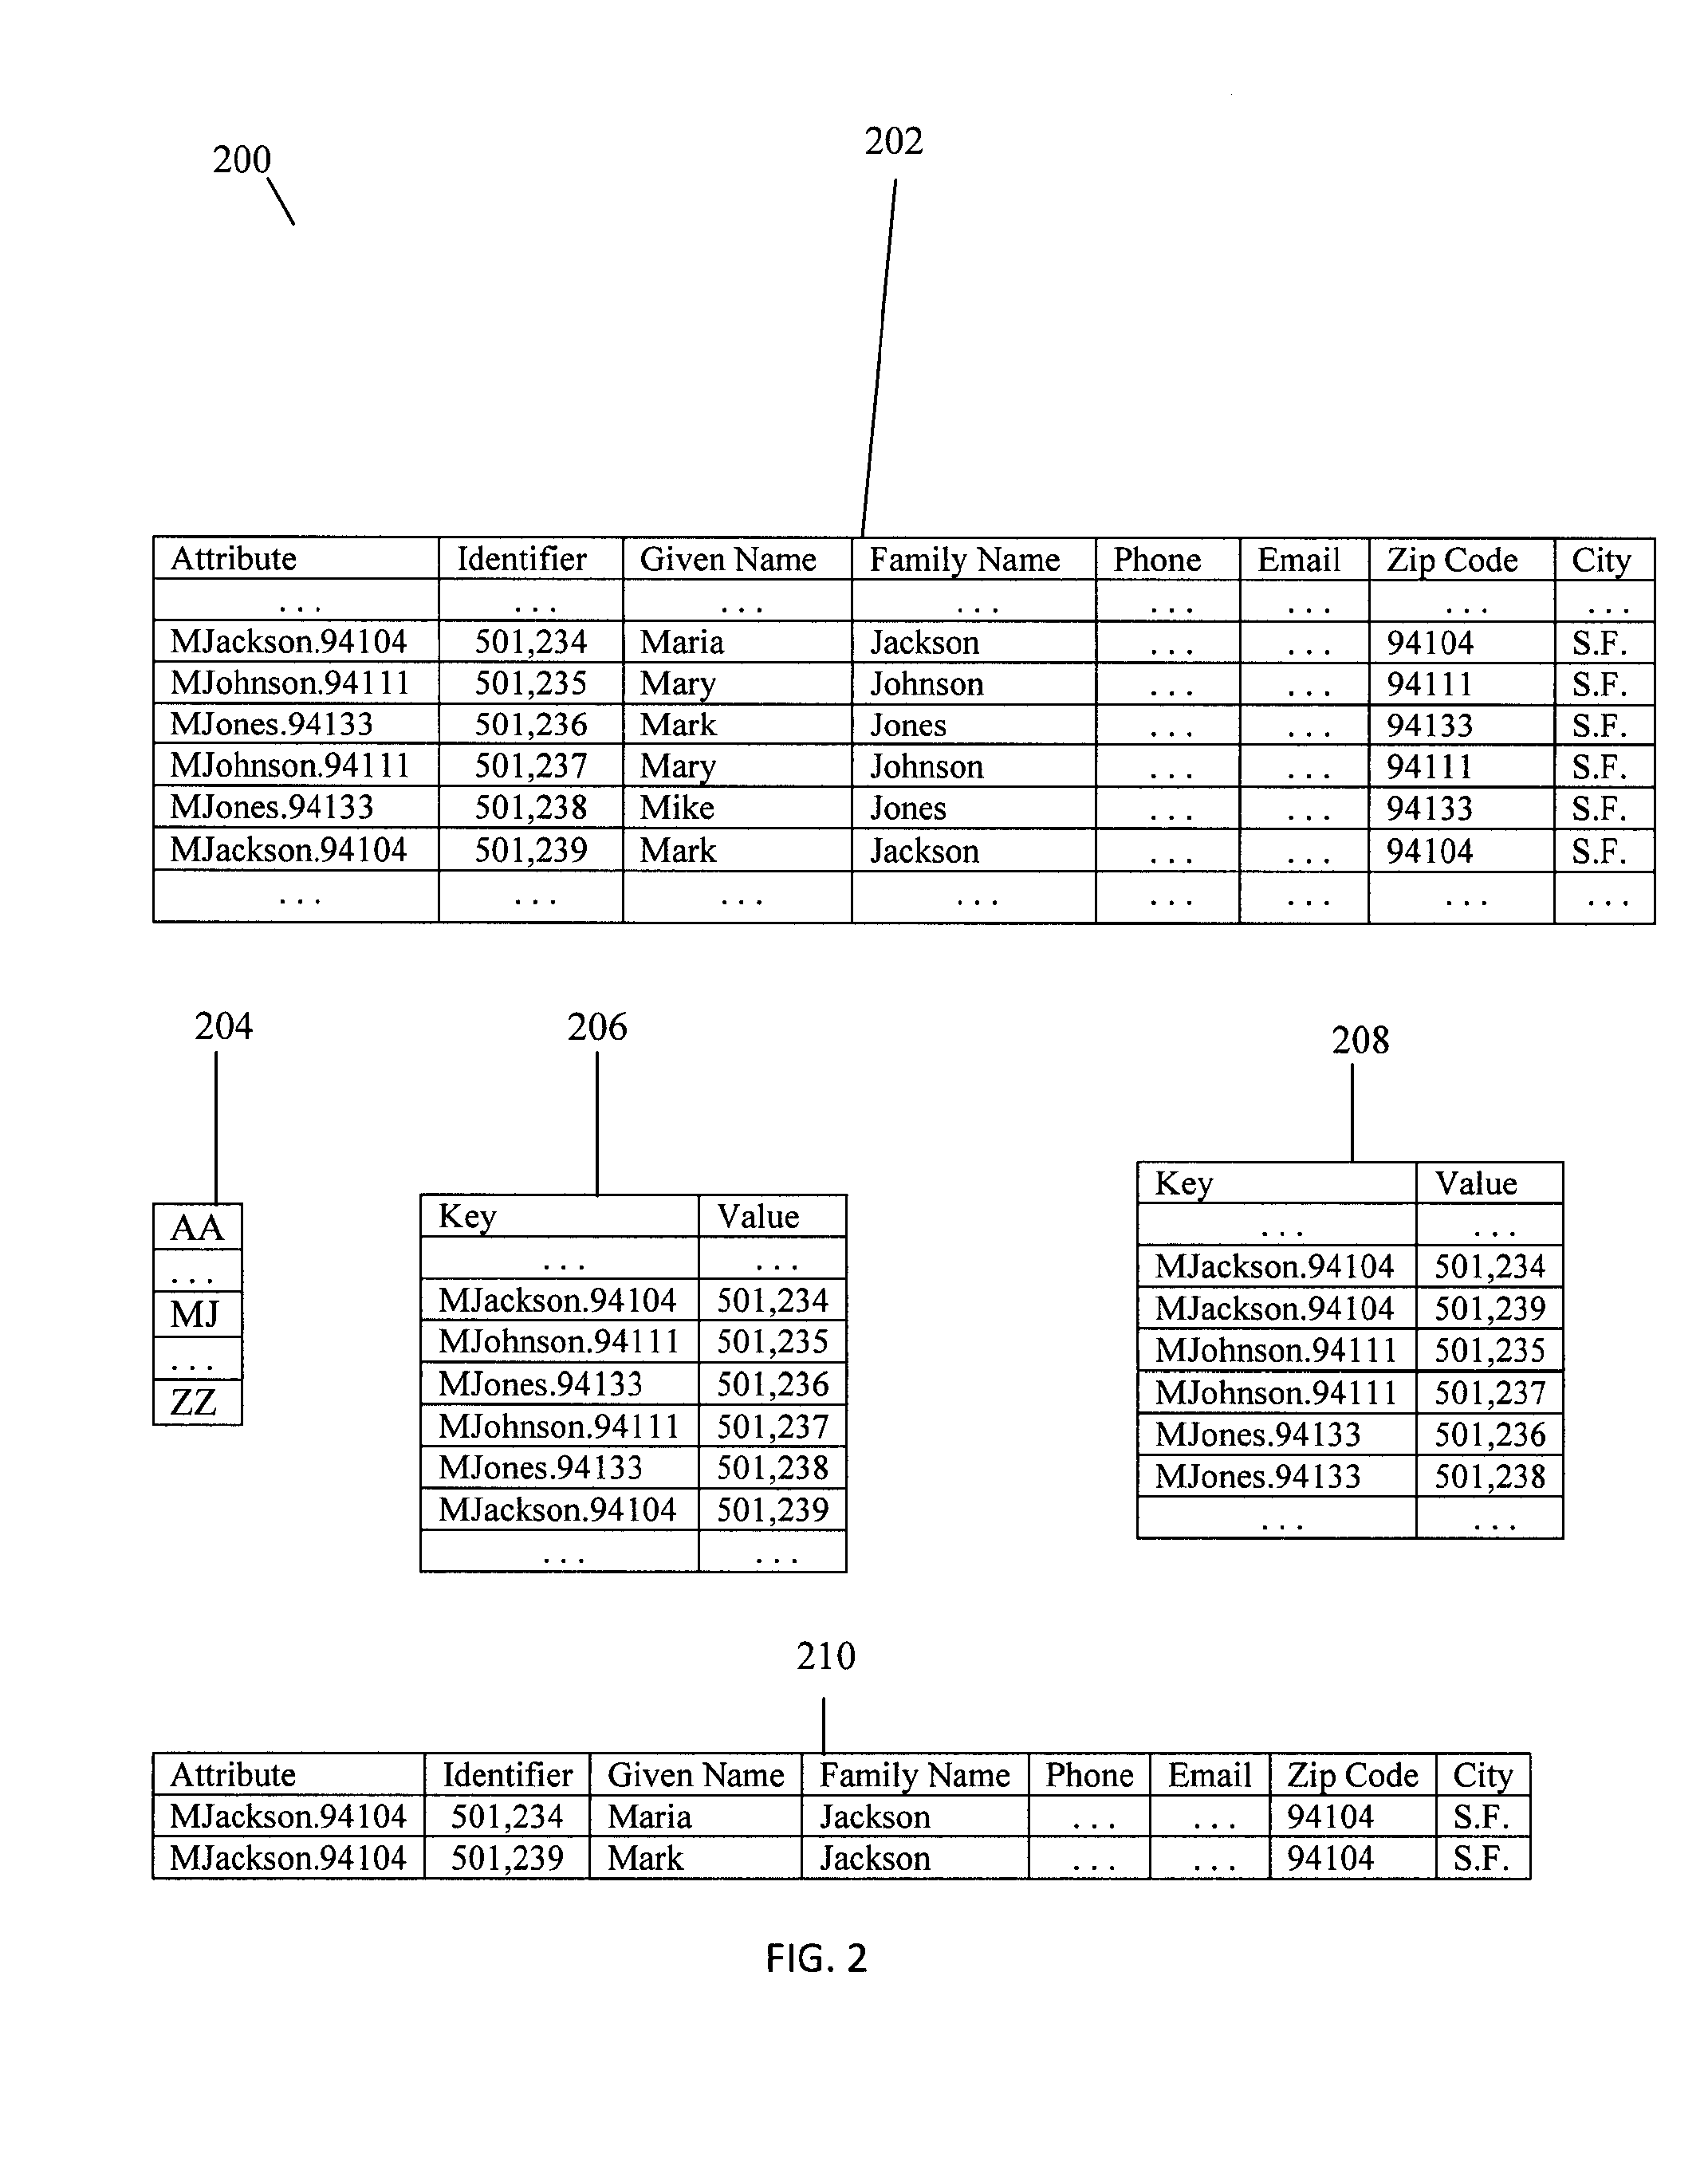 Method and system for creating indices and loading key-value pairs for nosql databases